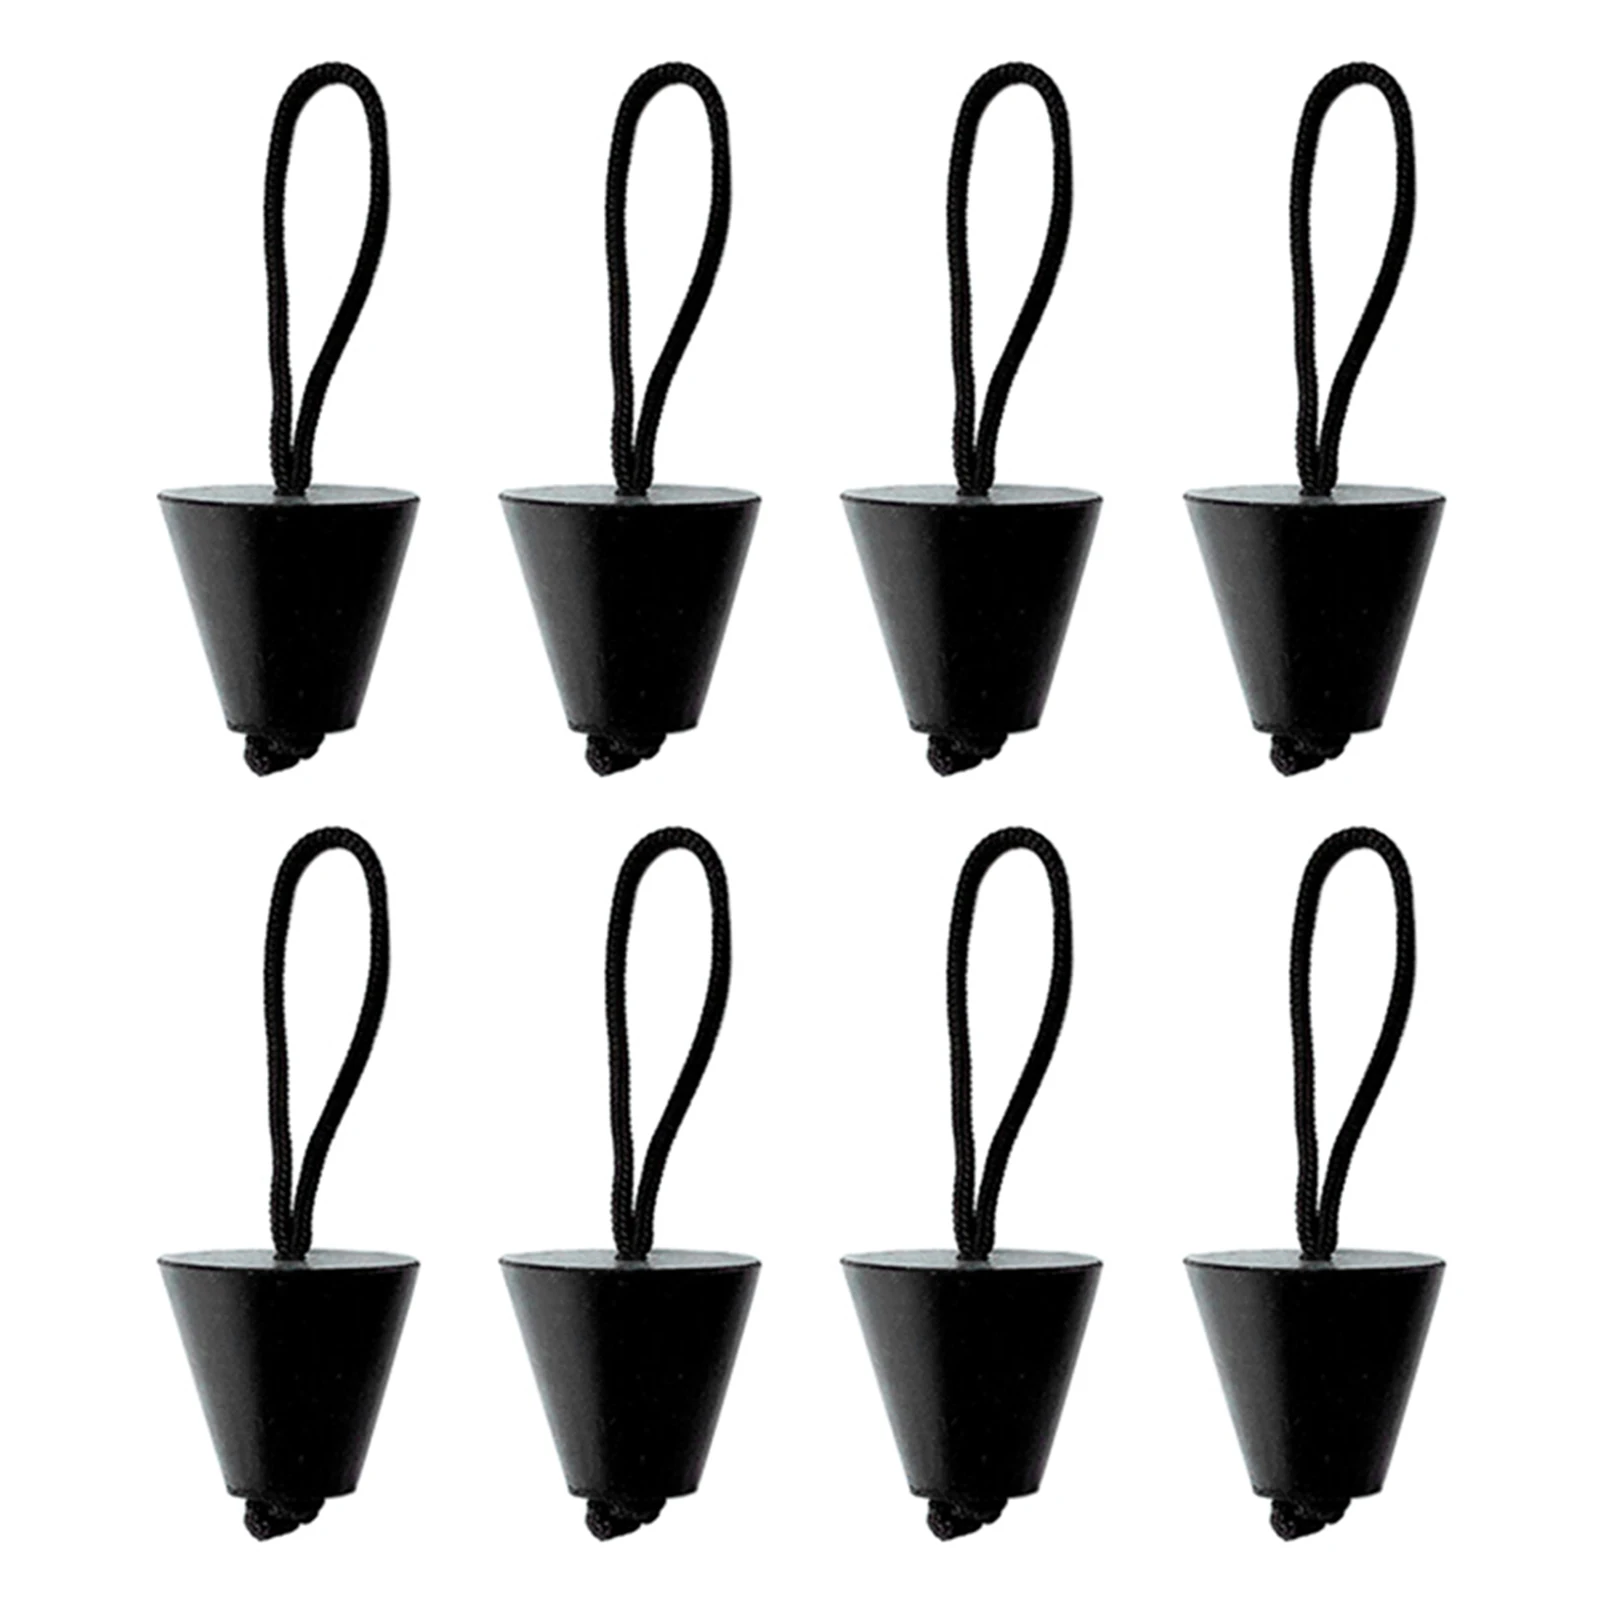 8pcs Black Replacement Parts Boat Marine Silicone Universal With Lanyard Drain Holes Lightweight Easy Install Kayak Scupper Plug